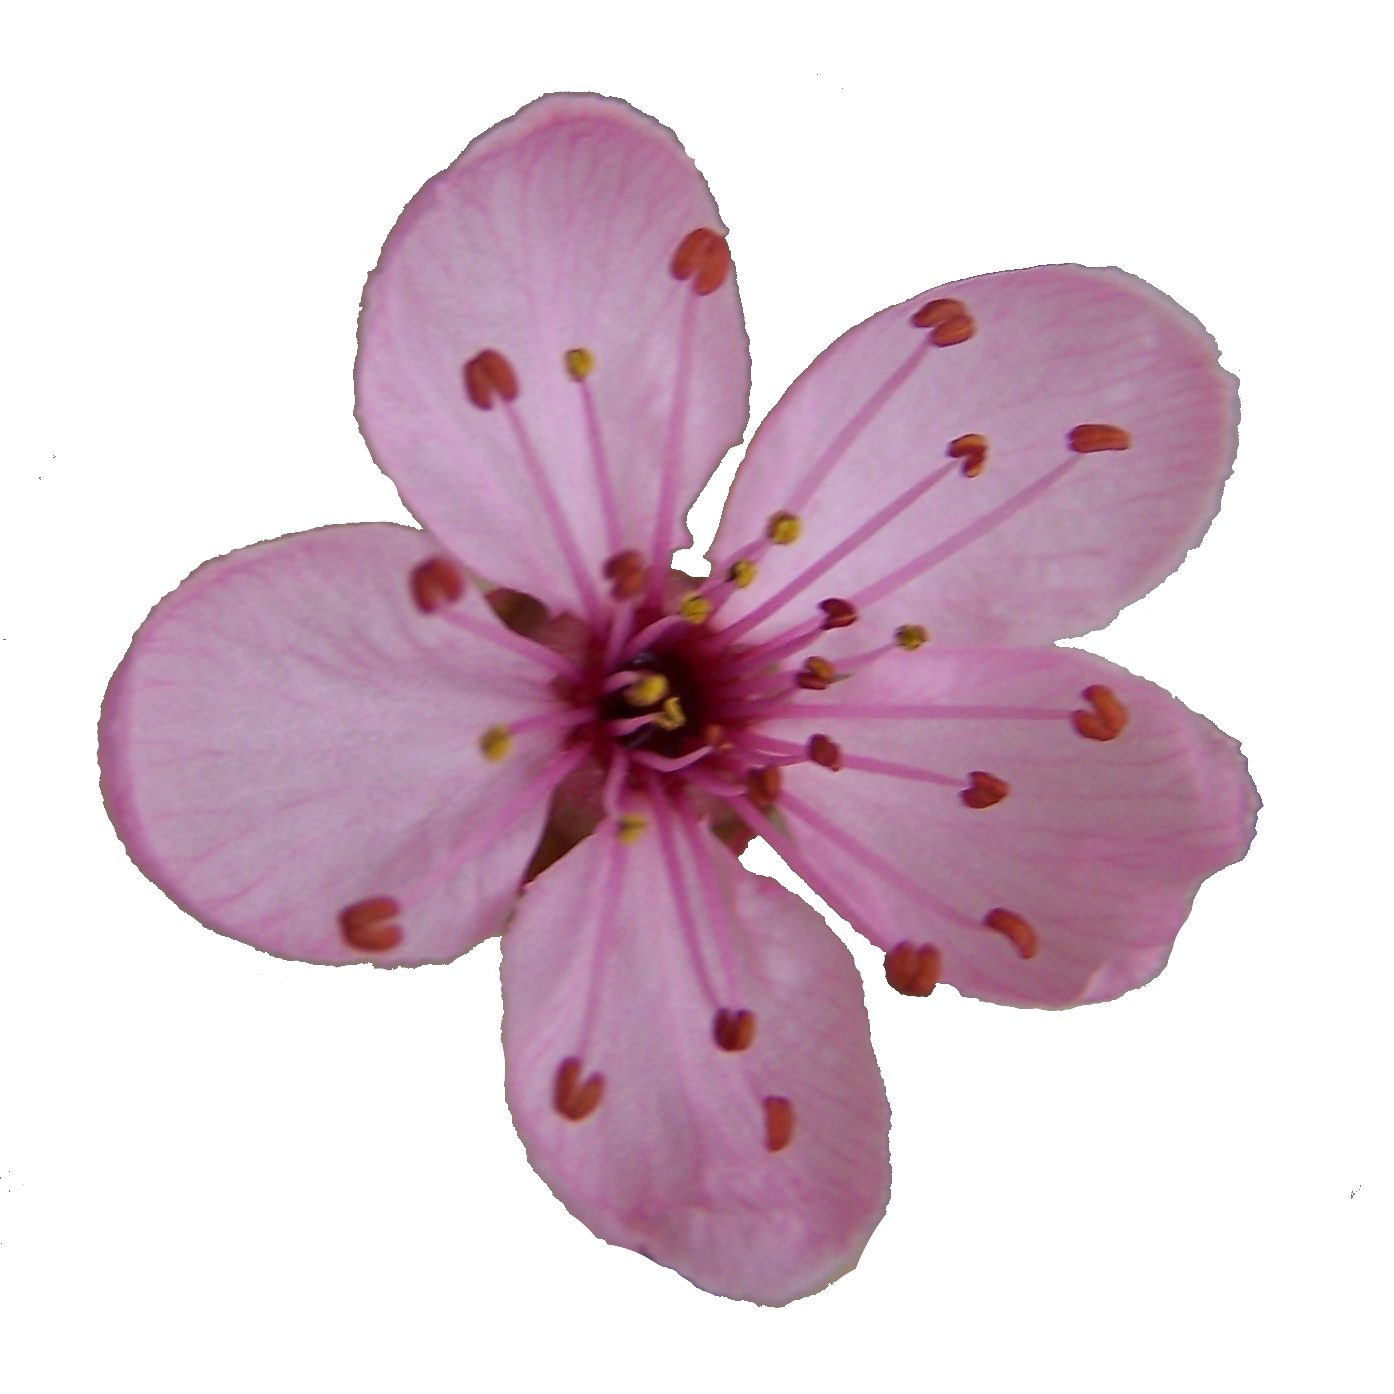 Single clipart cherry blossom - Pencil and in color single clipart ...